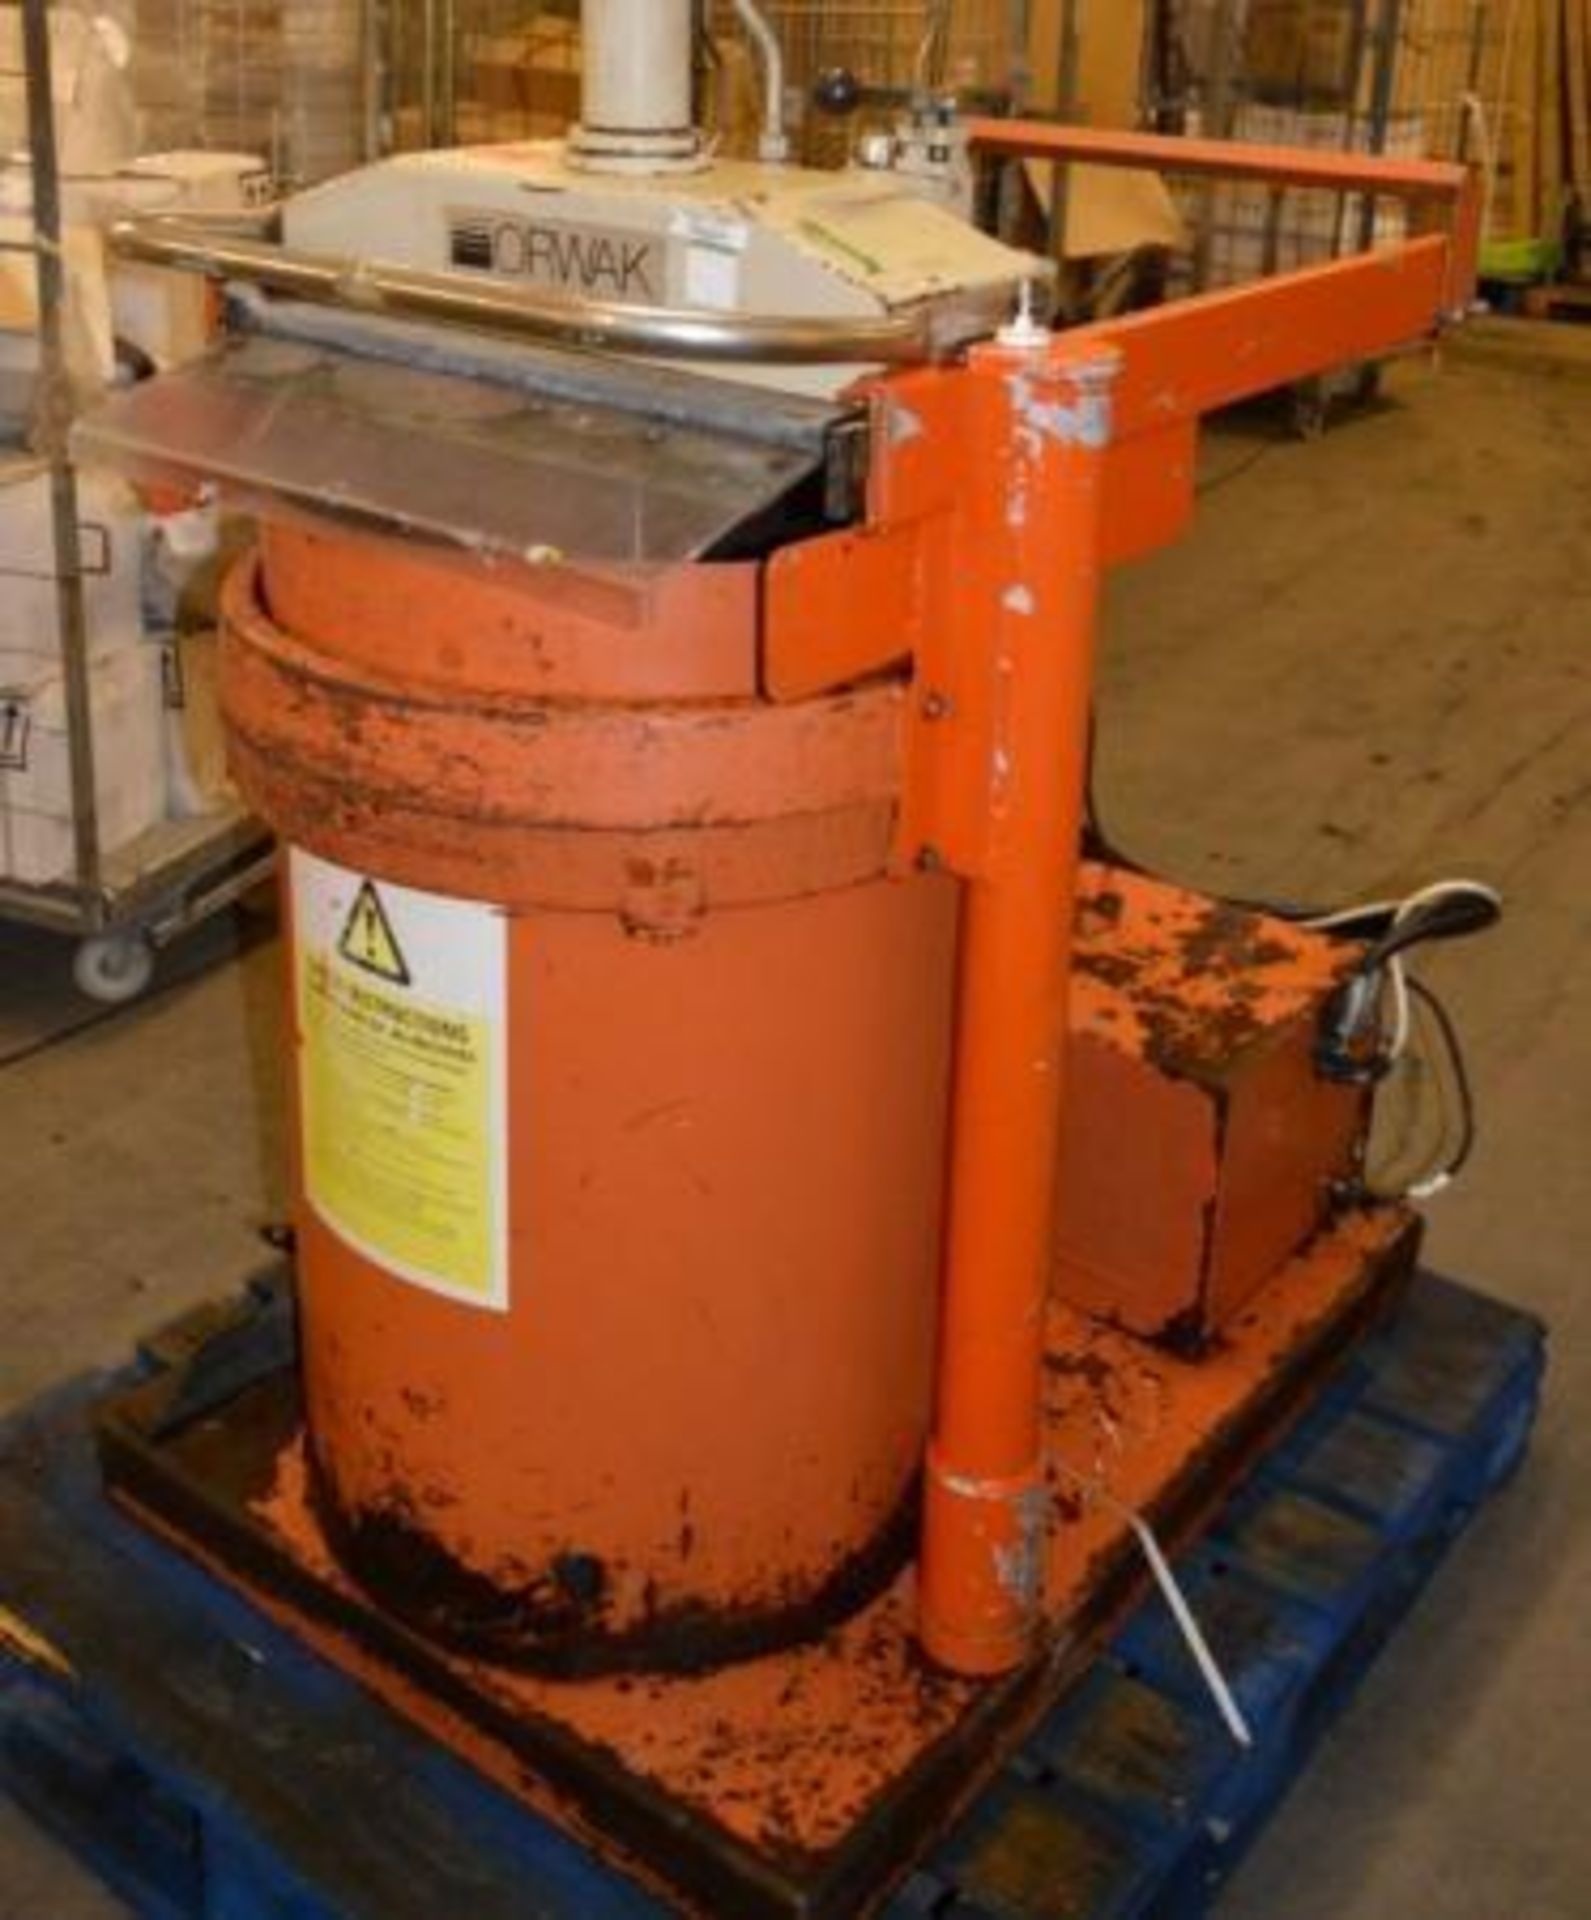 1 x Orwak 5030 Waste Compactor Bailer - Pre-owned For Compacting Recyclable or Non-Recyclable Waste - Image 3 of 4